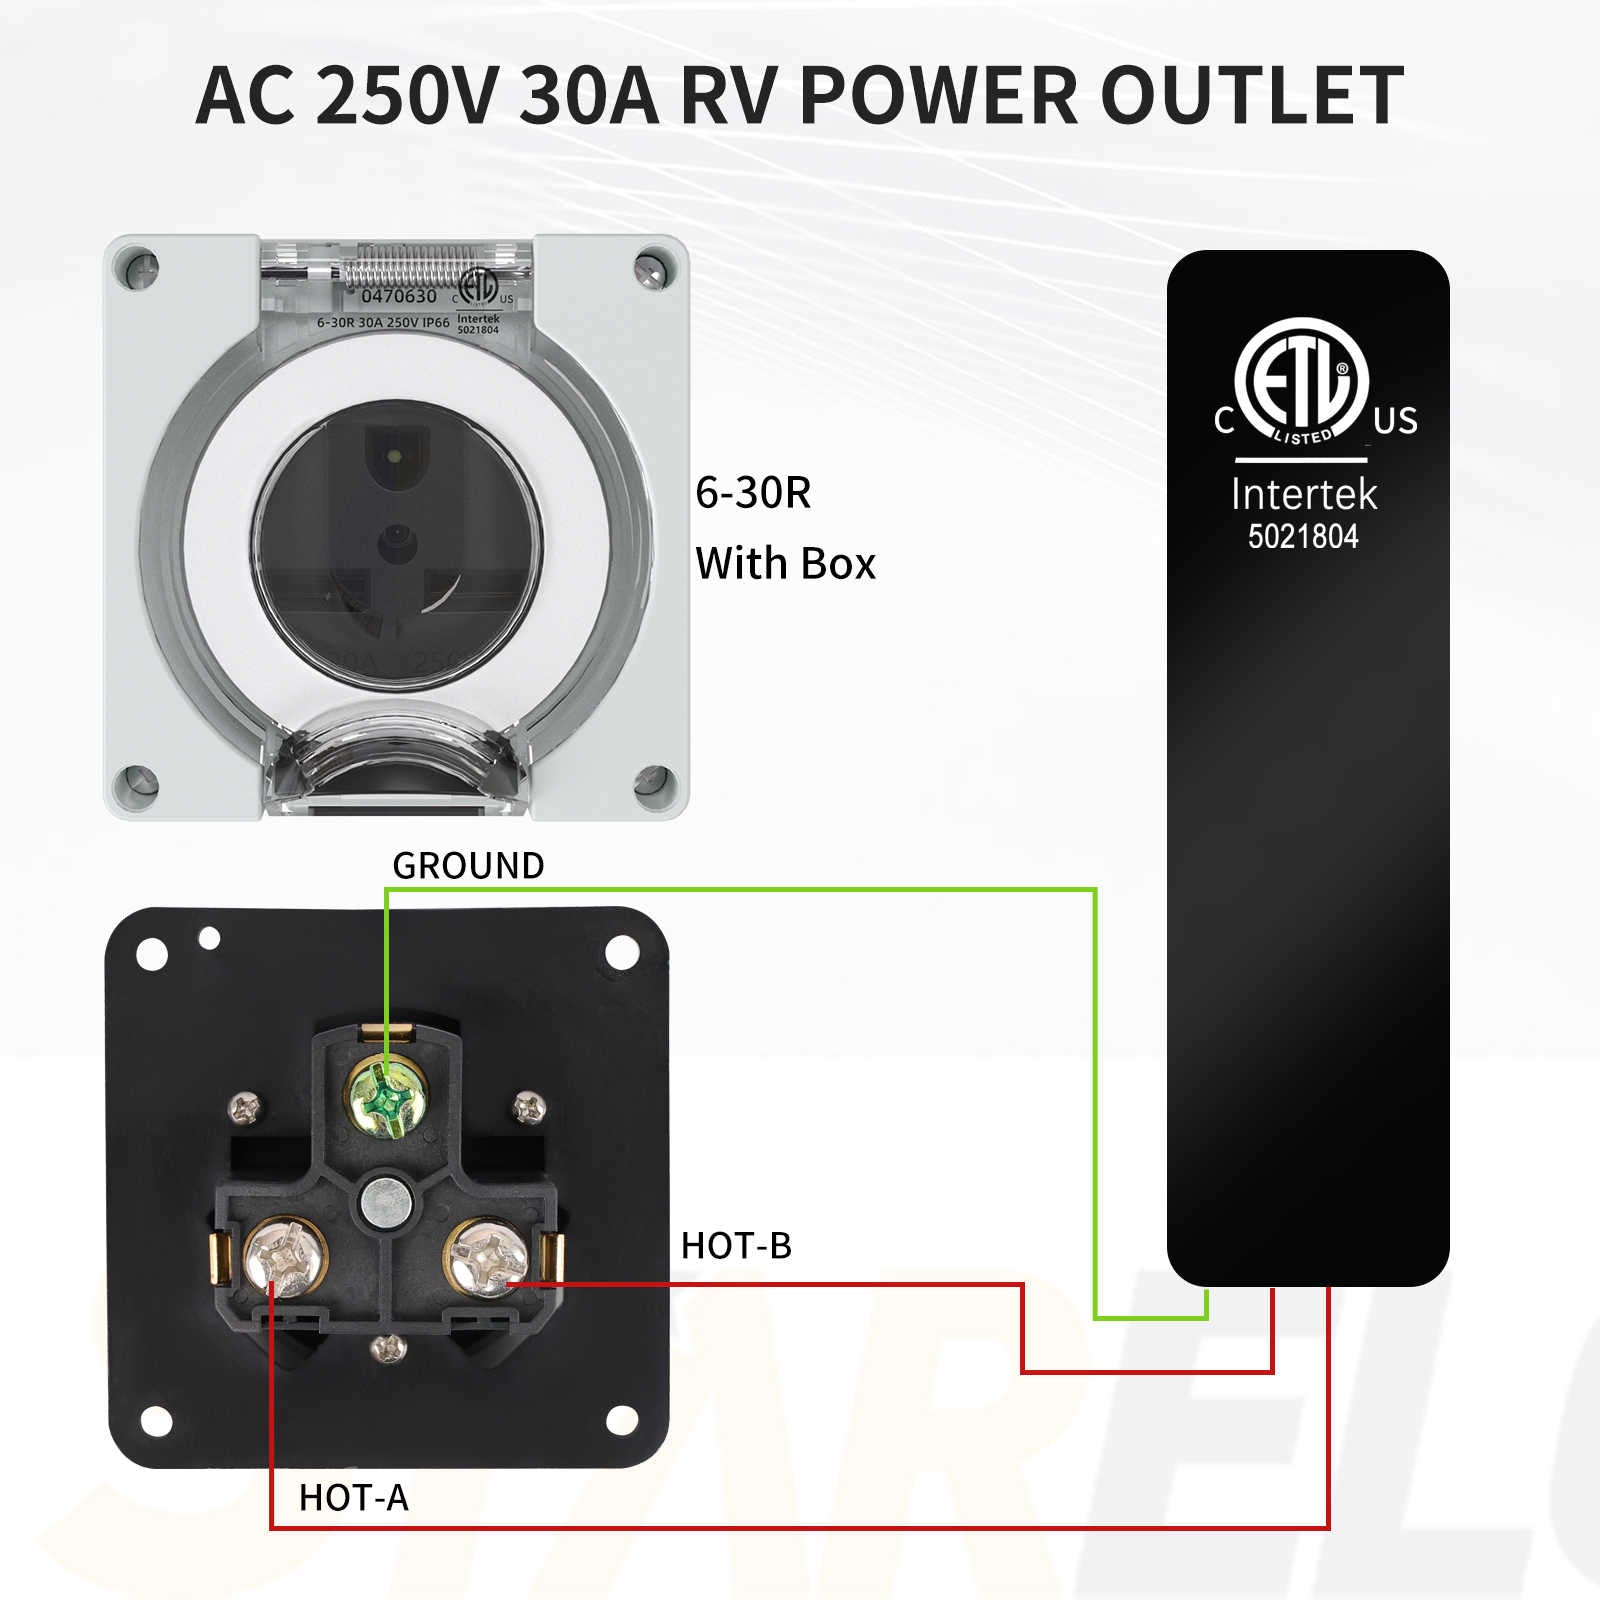 6-30R 30Amp power outlet box wiring diagram